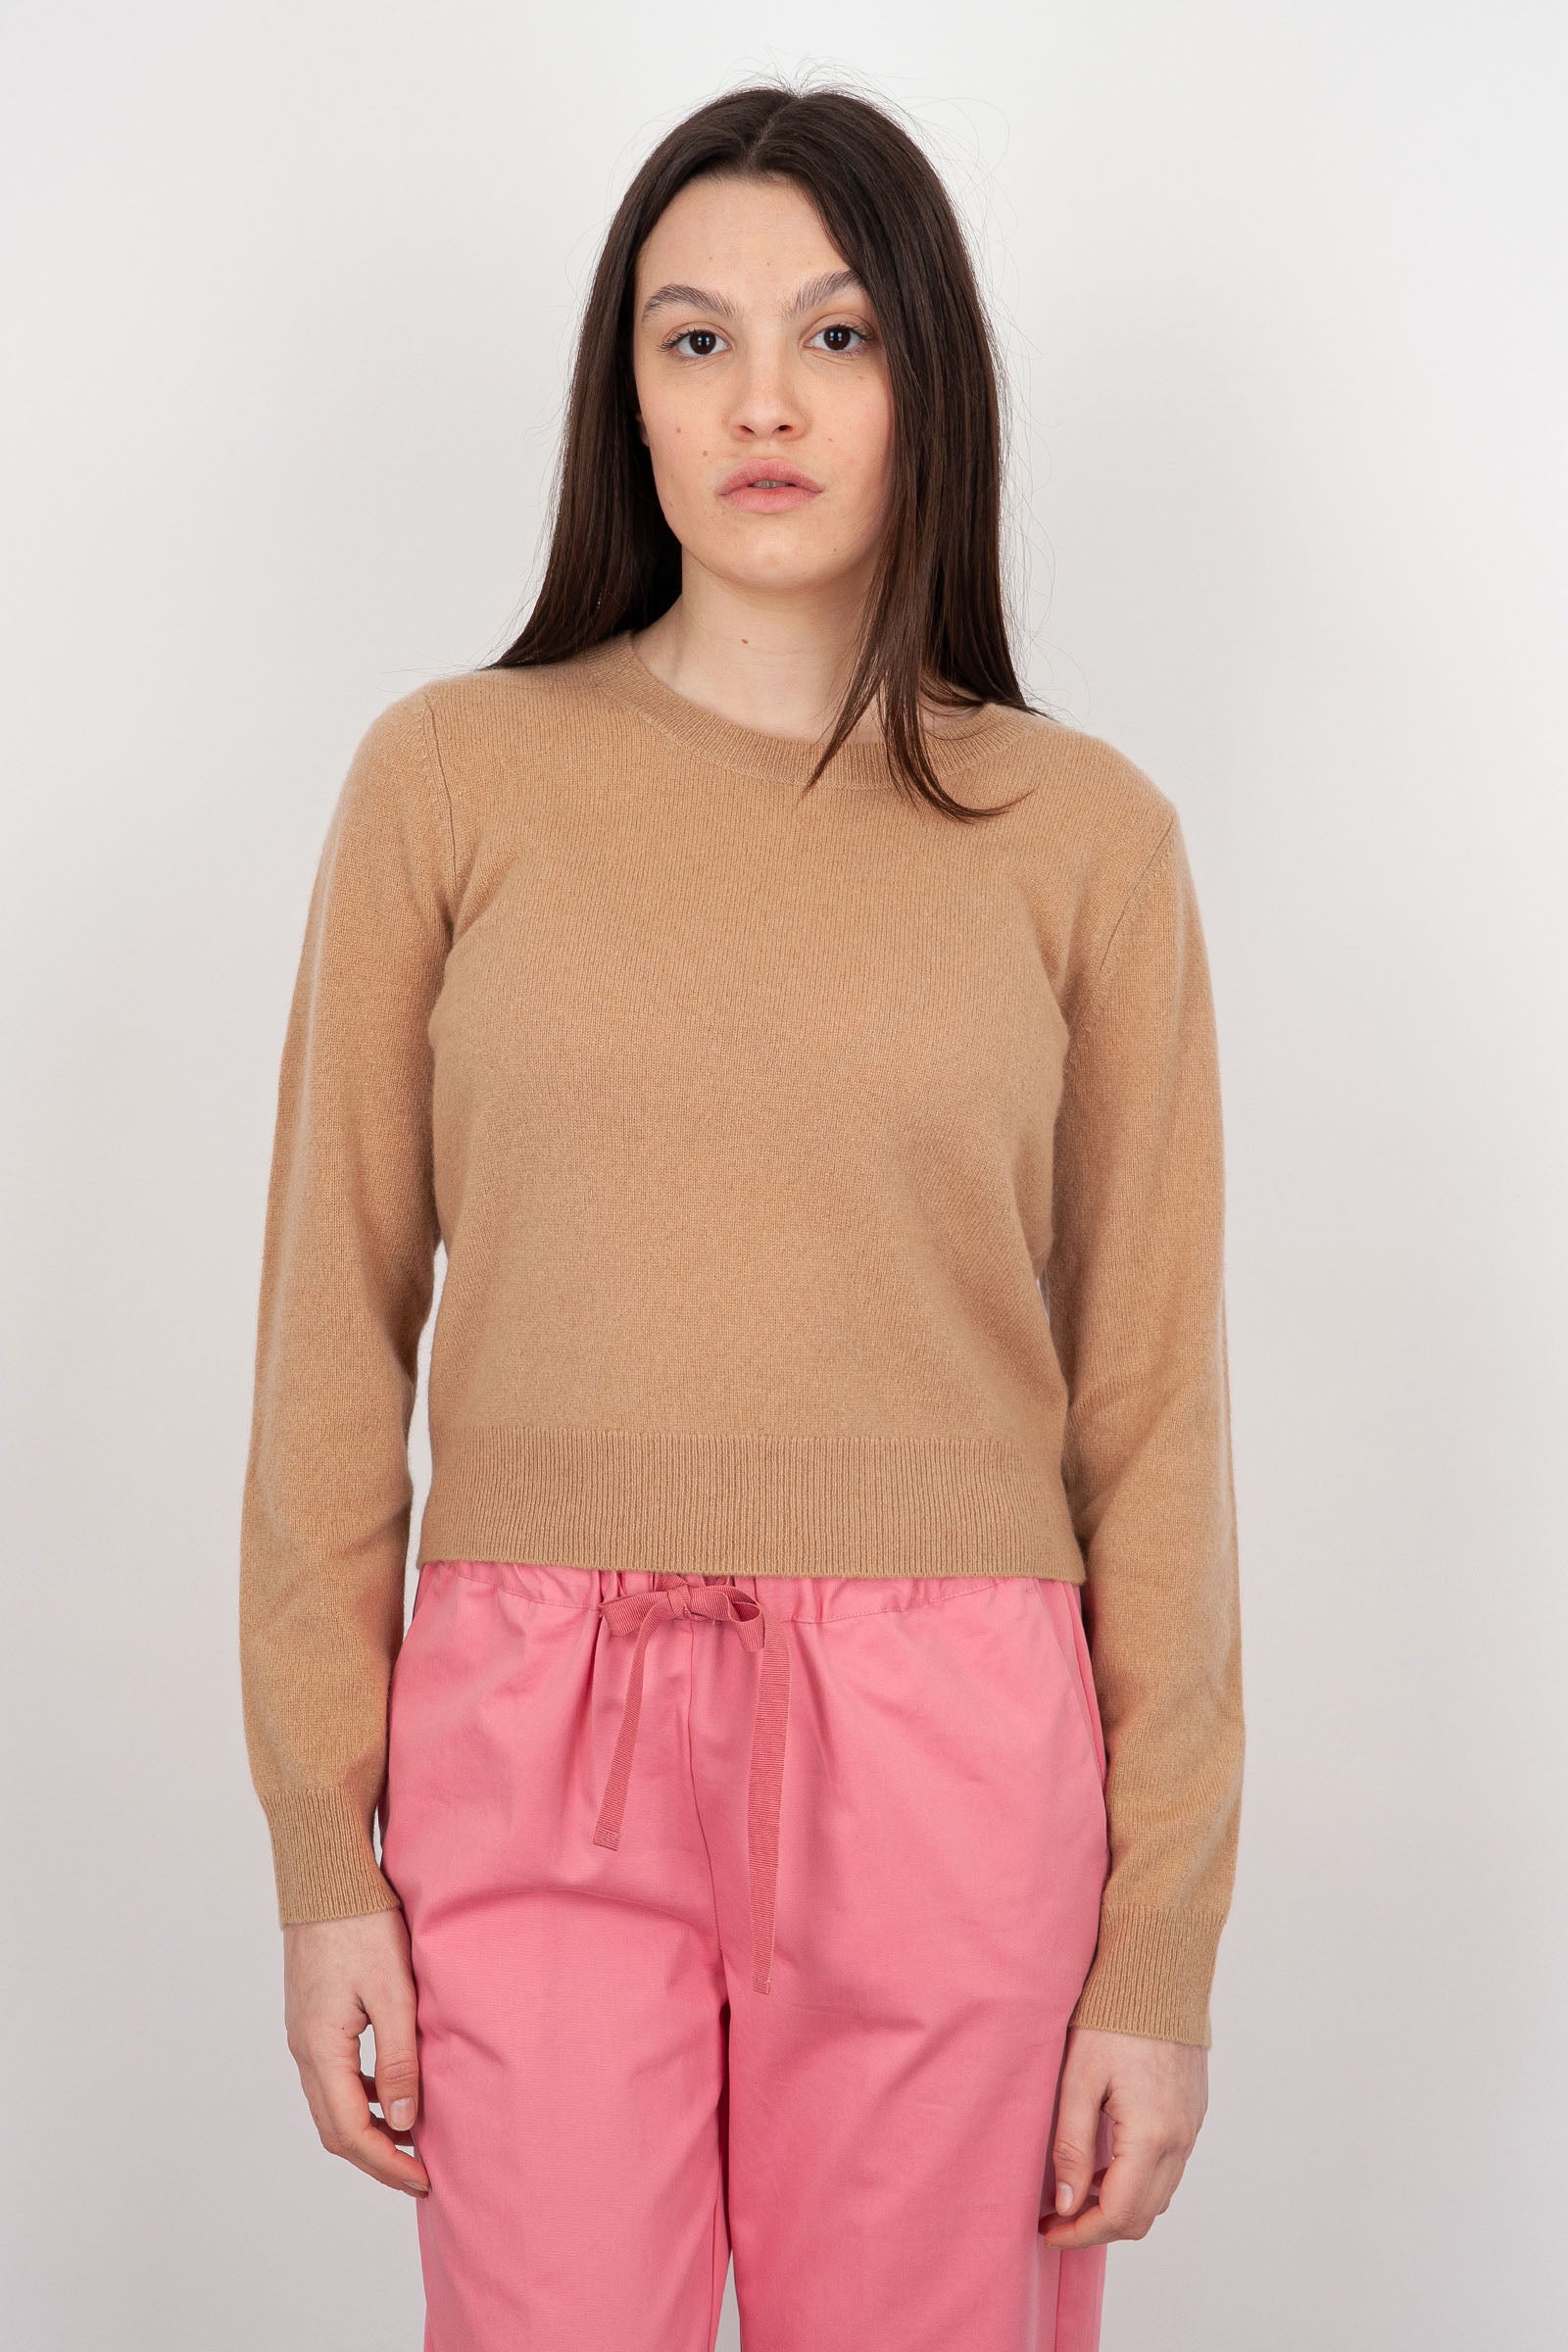 Absolut Cashmere Carlie Crew Neck Sweater in Sand Wool - 1